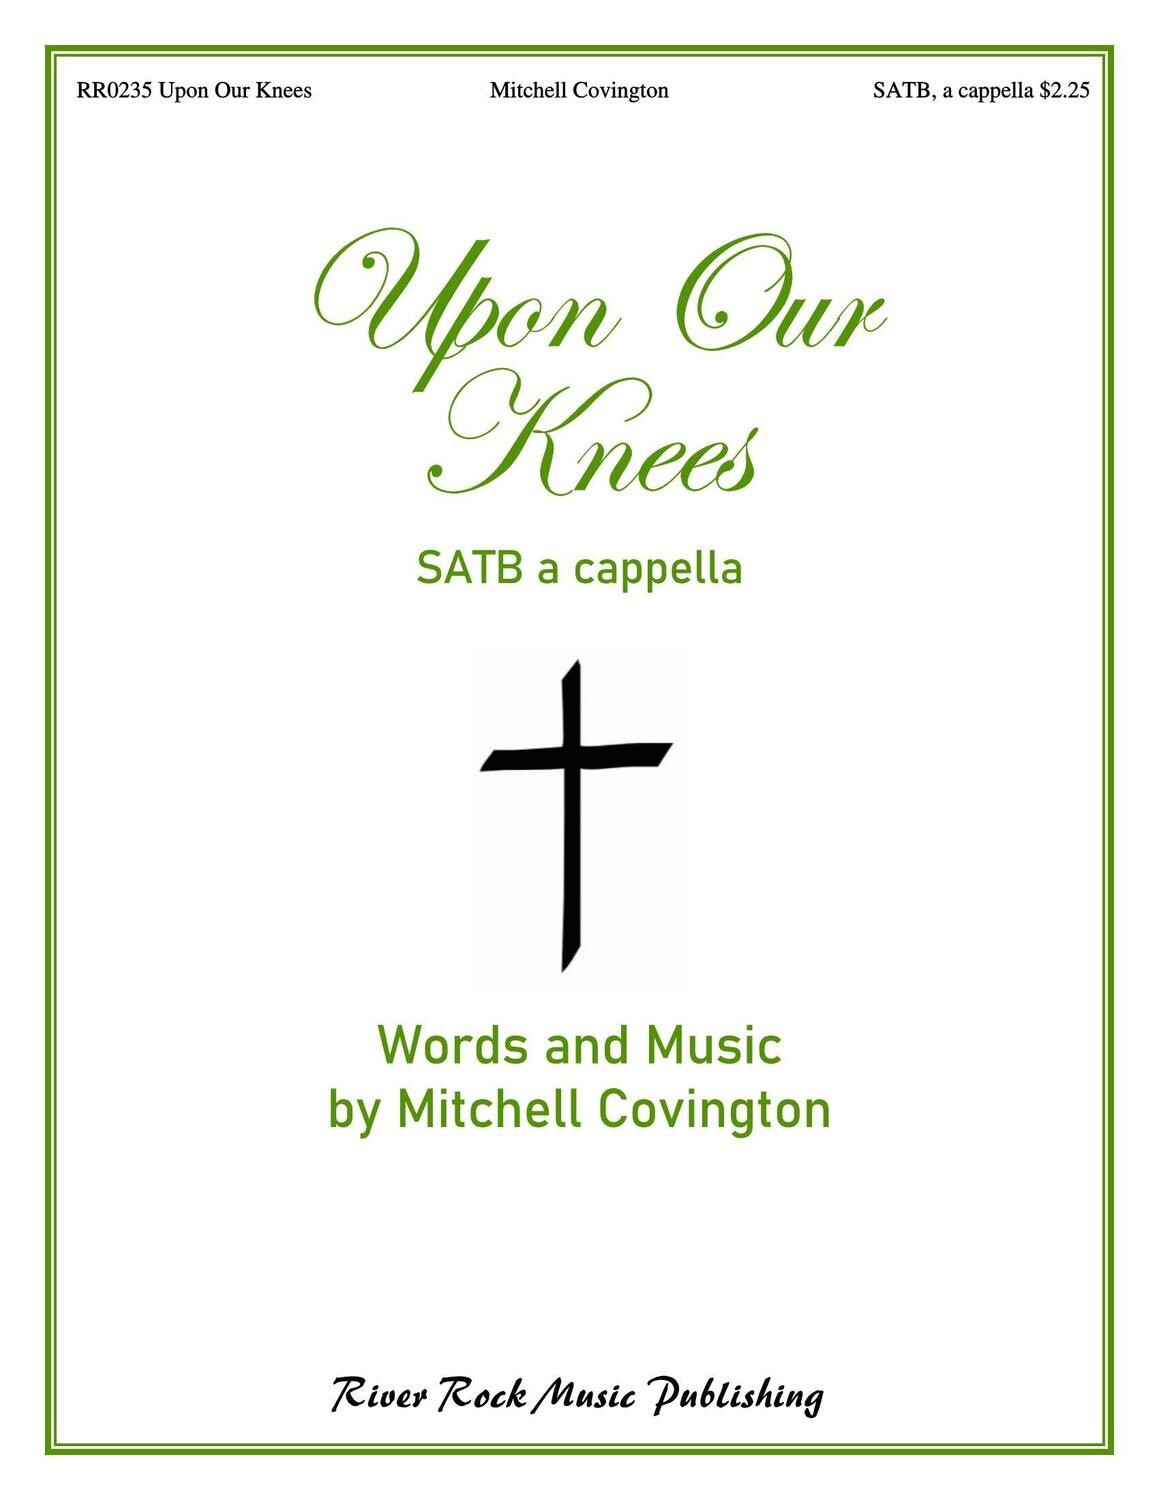 Upon Our Knees / SATB, a cappella